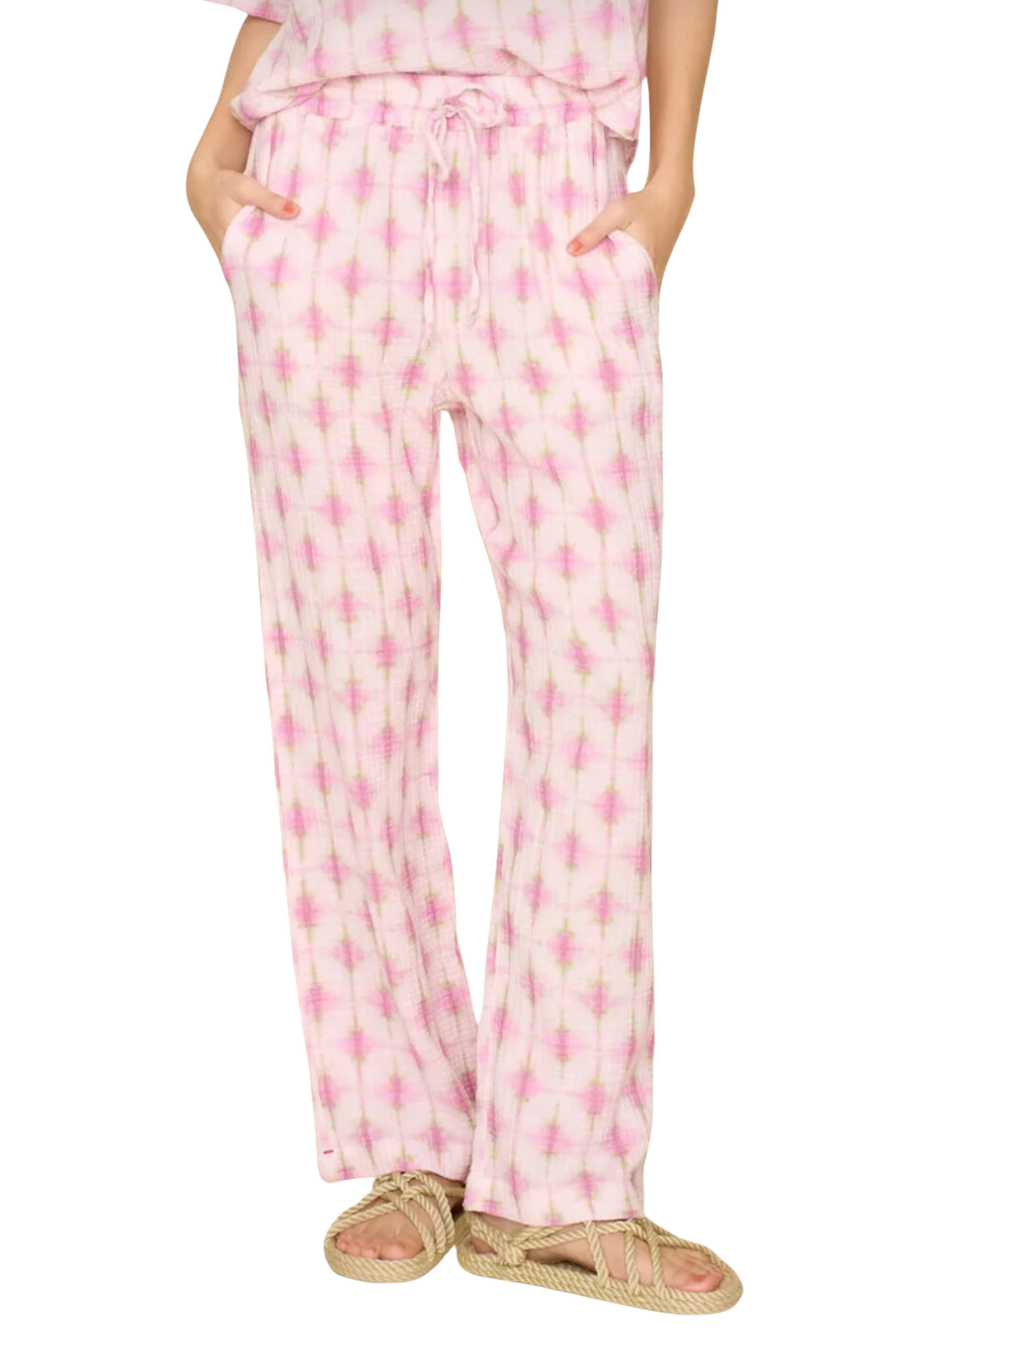 Atticus pant - pink twinkle